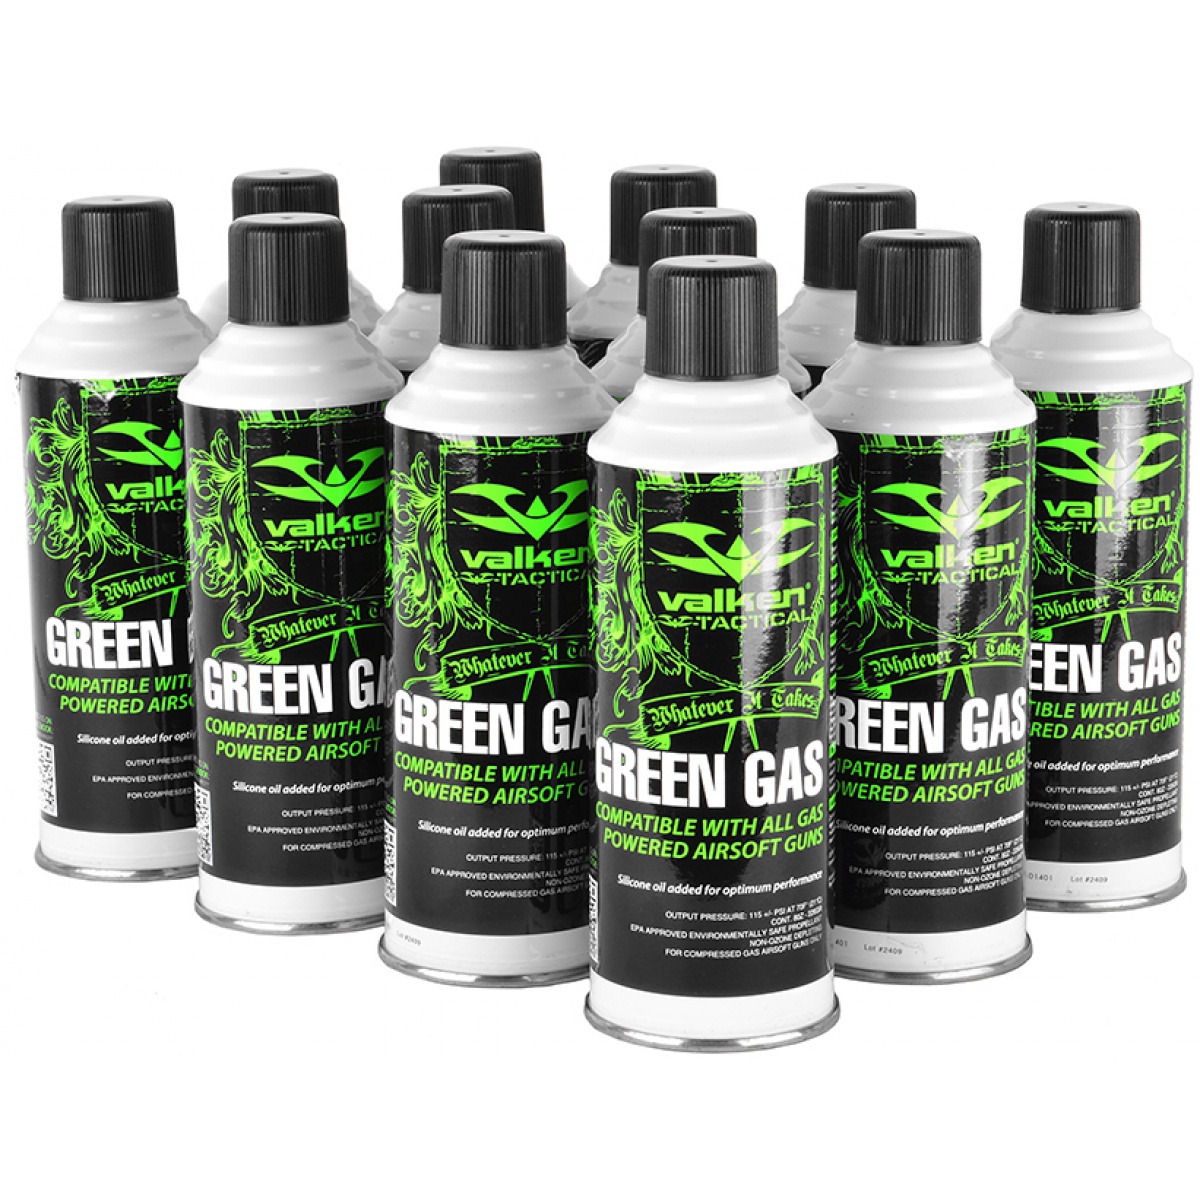 Valken Tactical Airsoft Green Gas for sale online 